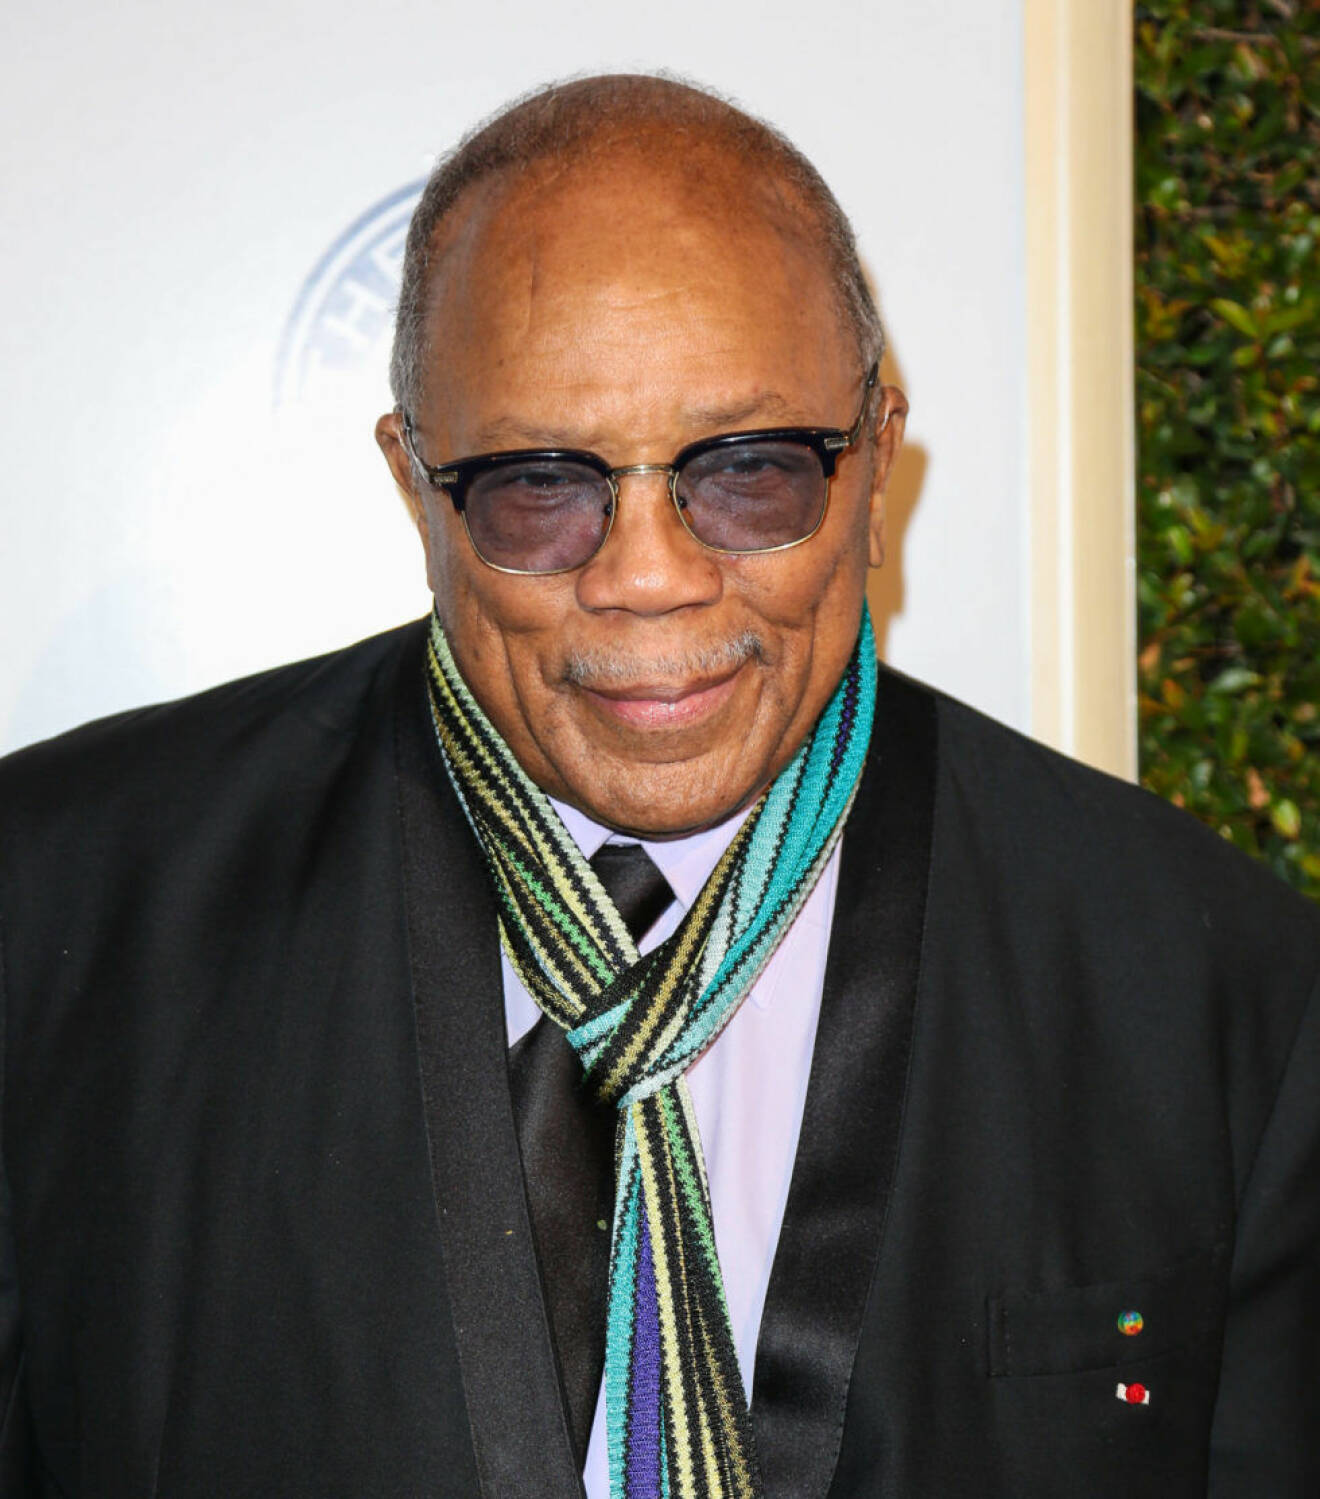 Stevie Wonder, Kaily Westbrook and Adam Westbrook are seen arriving at The Art of Elysium presents Stevie Wonder's HEAVEN - Celebrating the 10th Anniversary at Red Studios in Los Angeles, California. Pictured: Quincy Jones Ref: SPL1418618 070117 Picture by: gotpap/Bauergriffin.com *** Local Caption *** 8.21383330